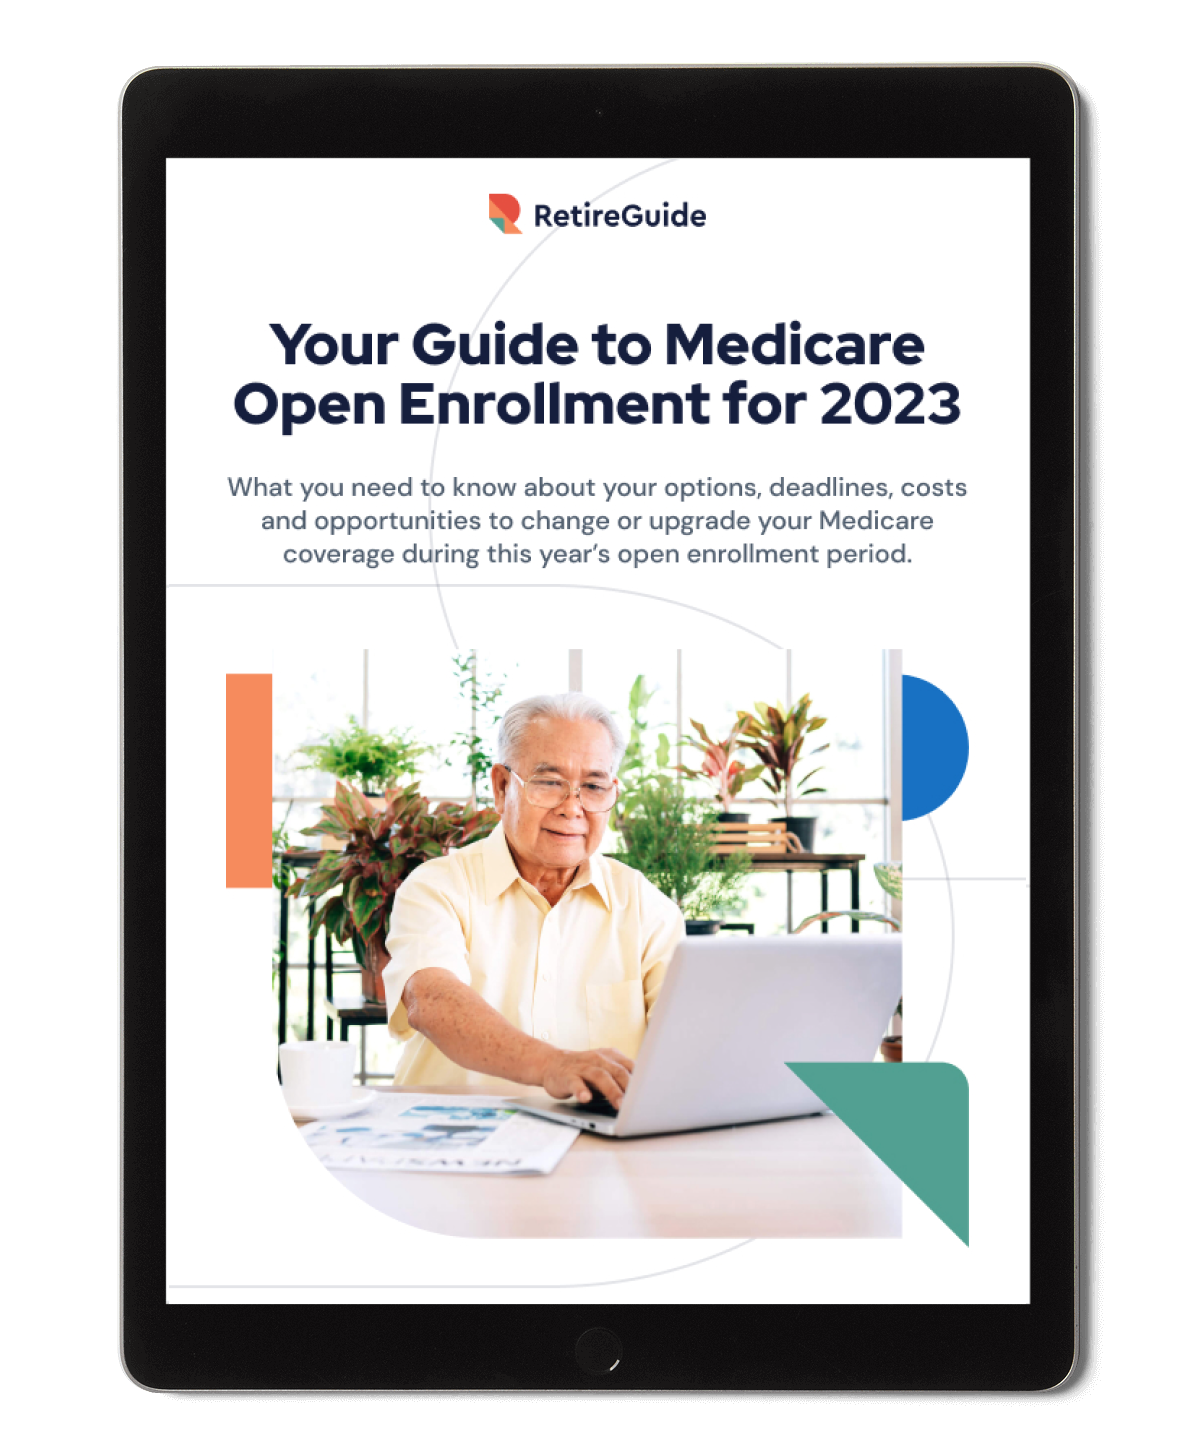 Medicare Open Enrollment Preview Image on iPad